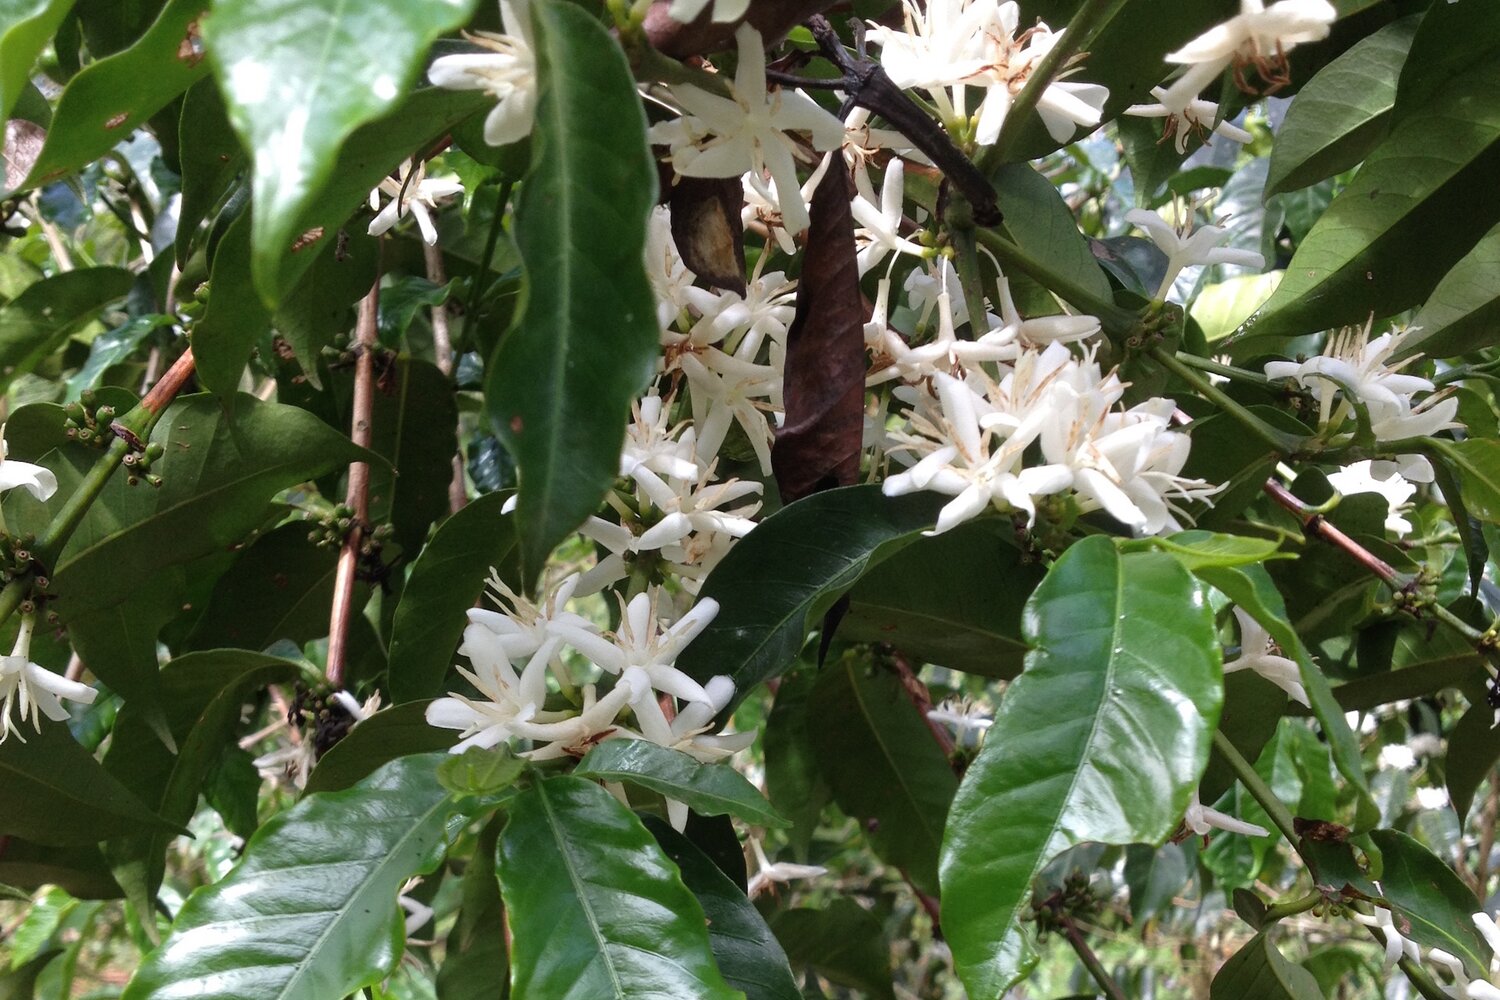 Coffee blossoms from the afromontane rainforest in Kafa, Ethiopia. Photo credit: Simran Sethi